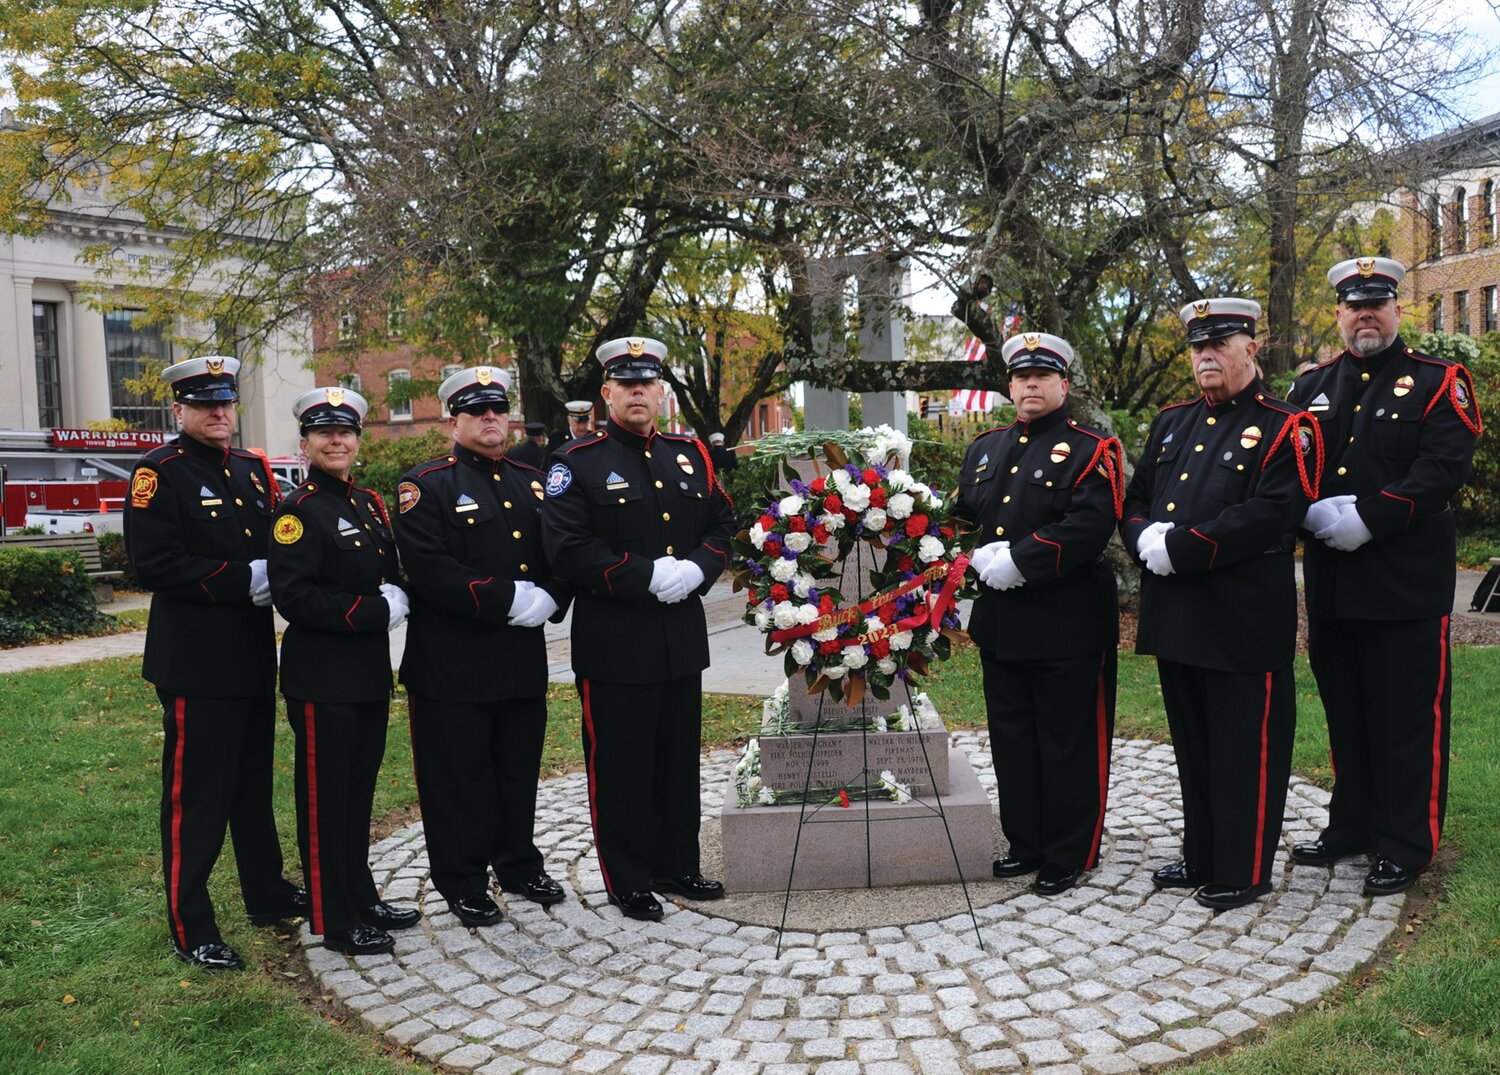 Members of the honor guard gather around a wreath placed in remembrance of Bucks County’s fallen firefighters.